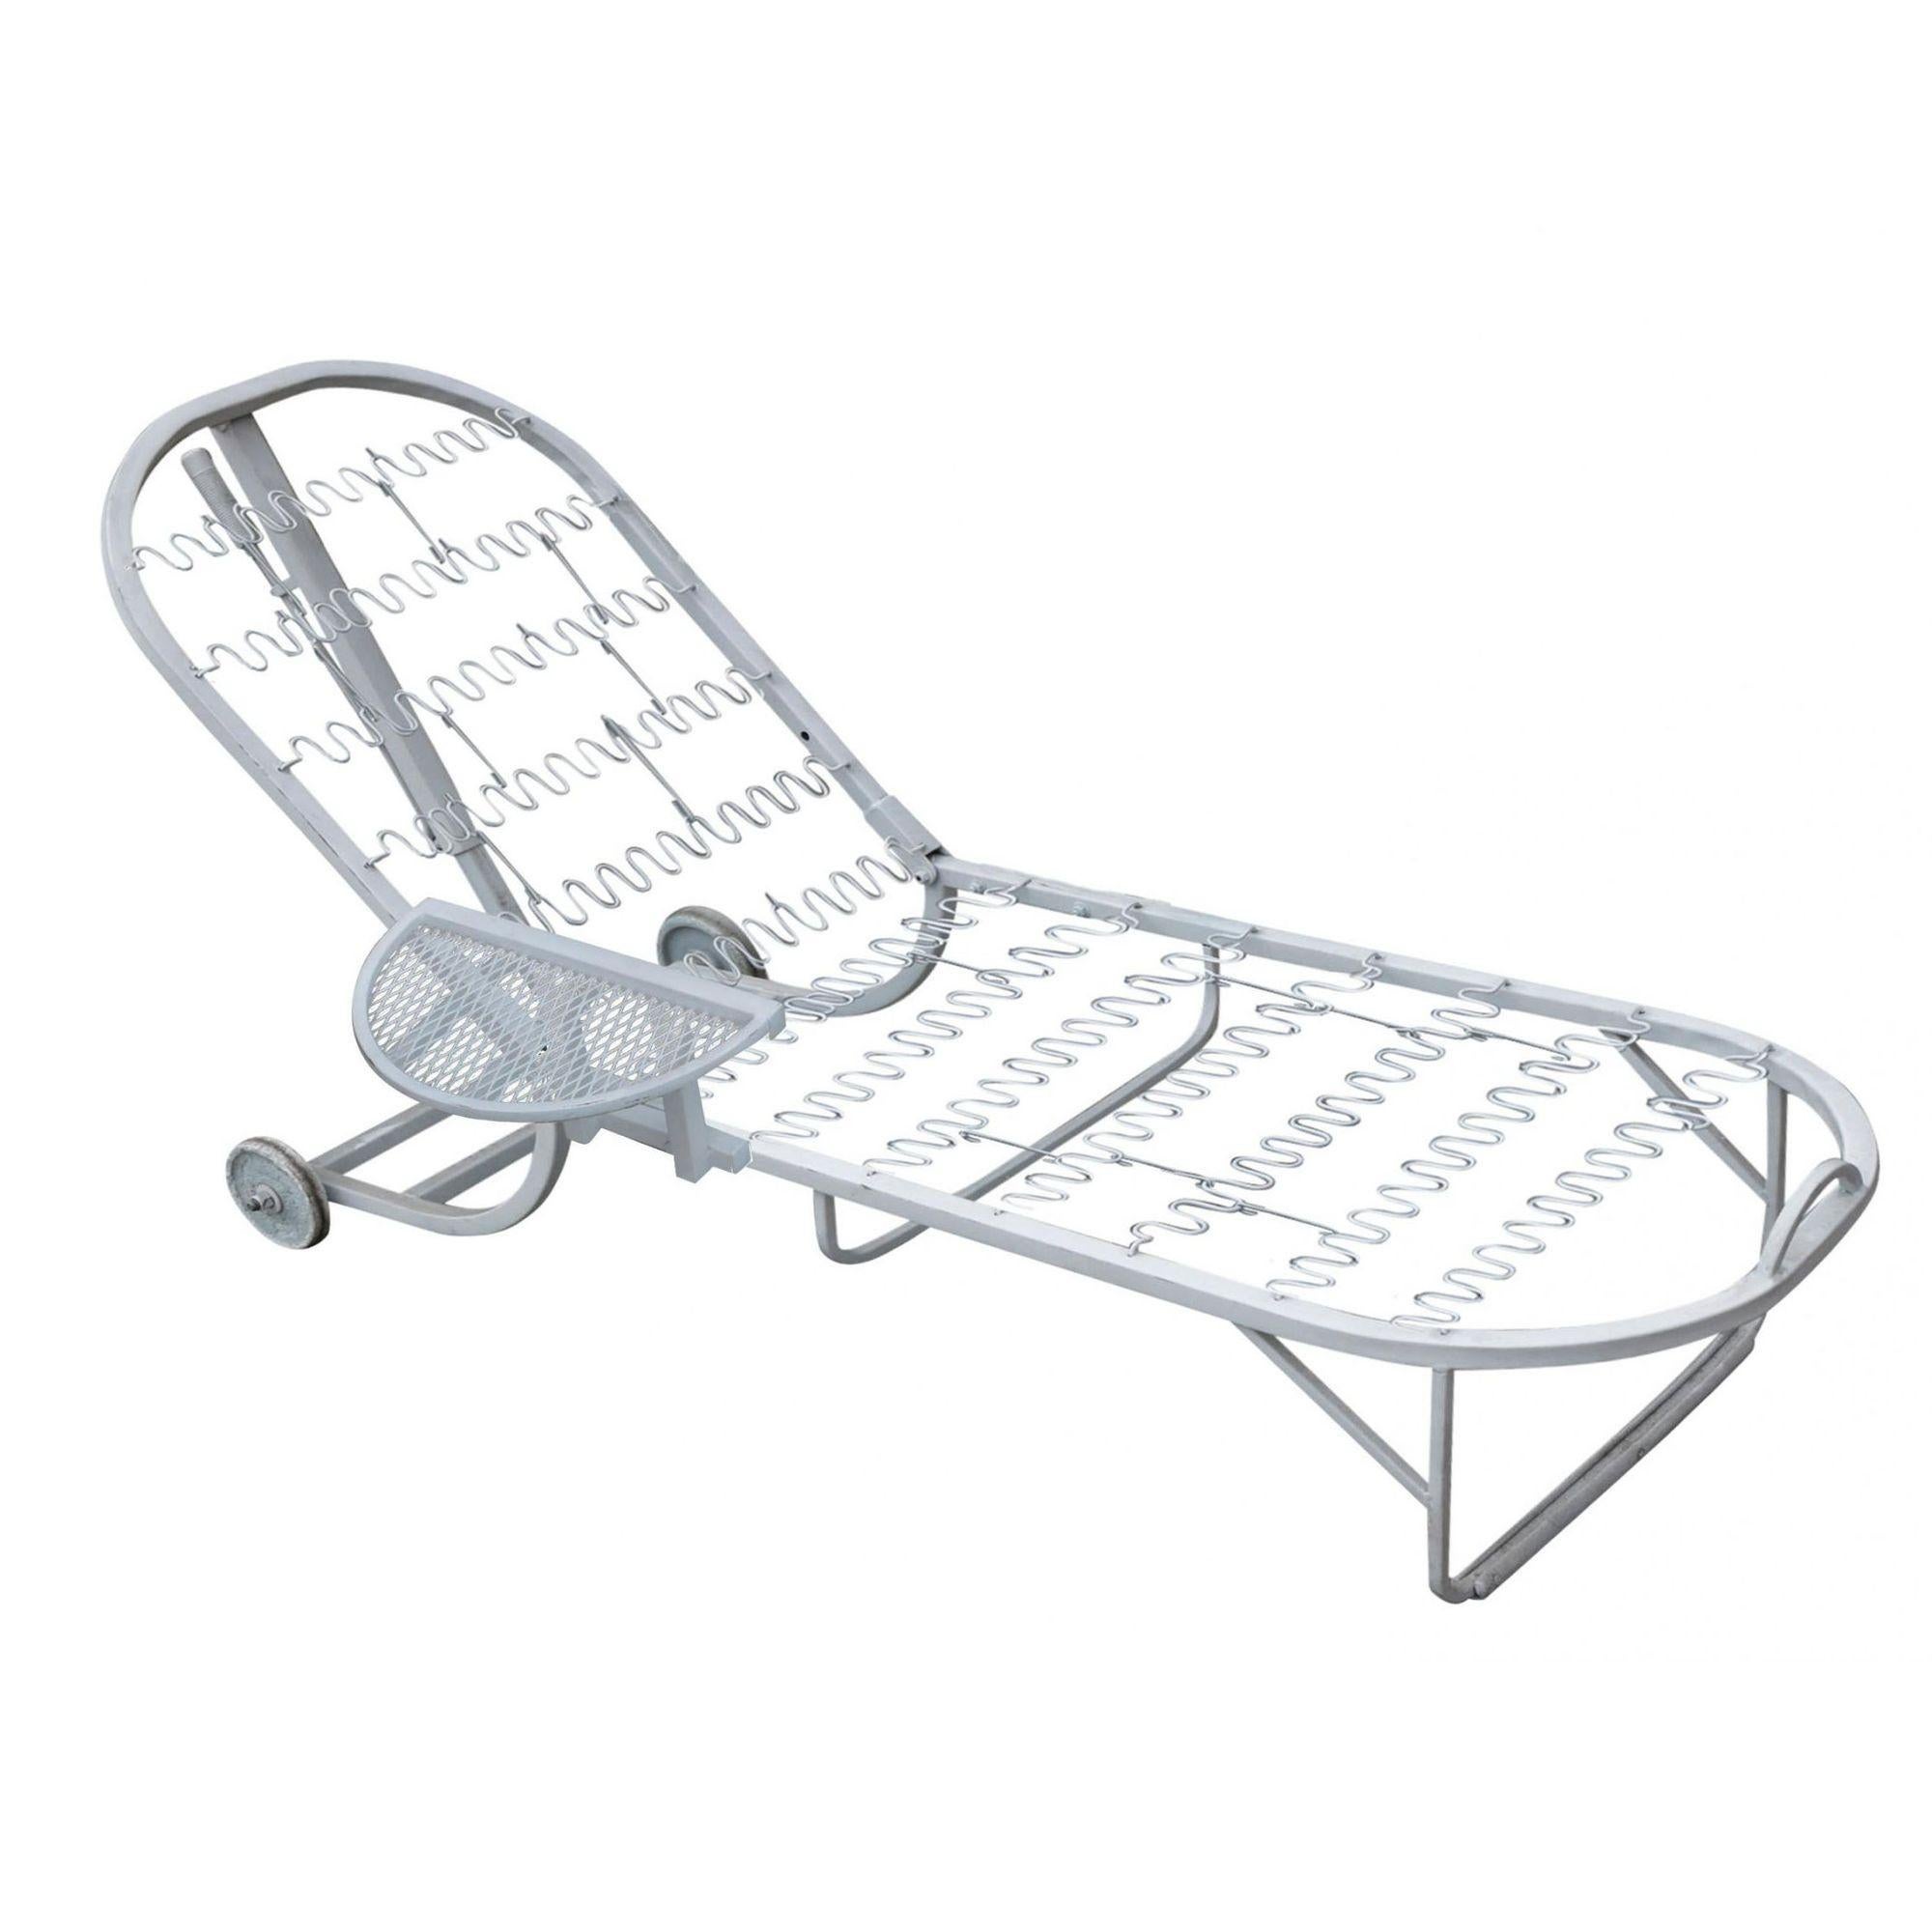 White steel tubular outdoor / patio chaise lounge, produced in 1960 by the Woodard Furniture Company. This comfortable and stylish vintage chaise lounge features a fully adjustable reclining back and back wheels for easy moving. The modern oval